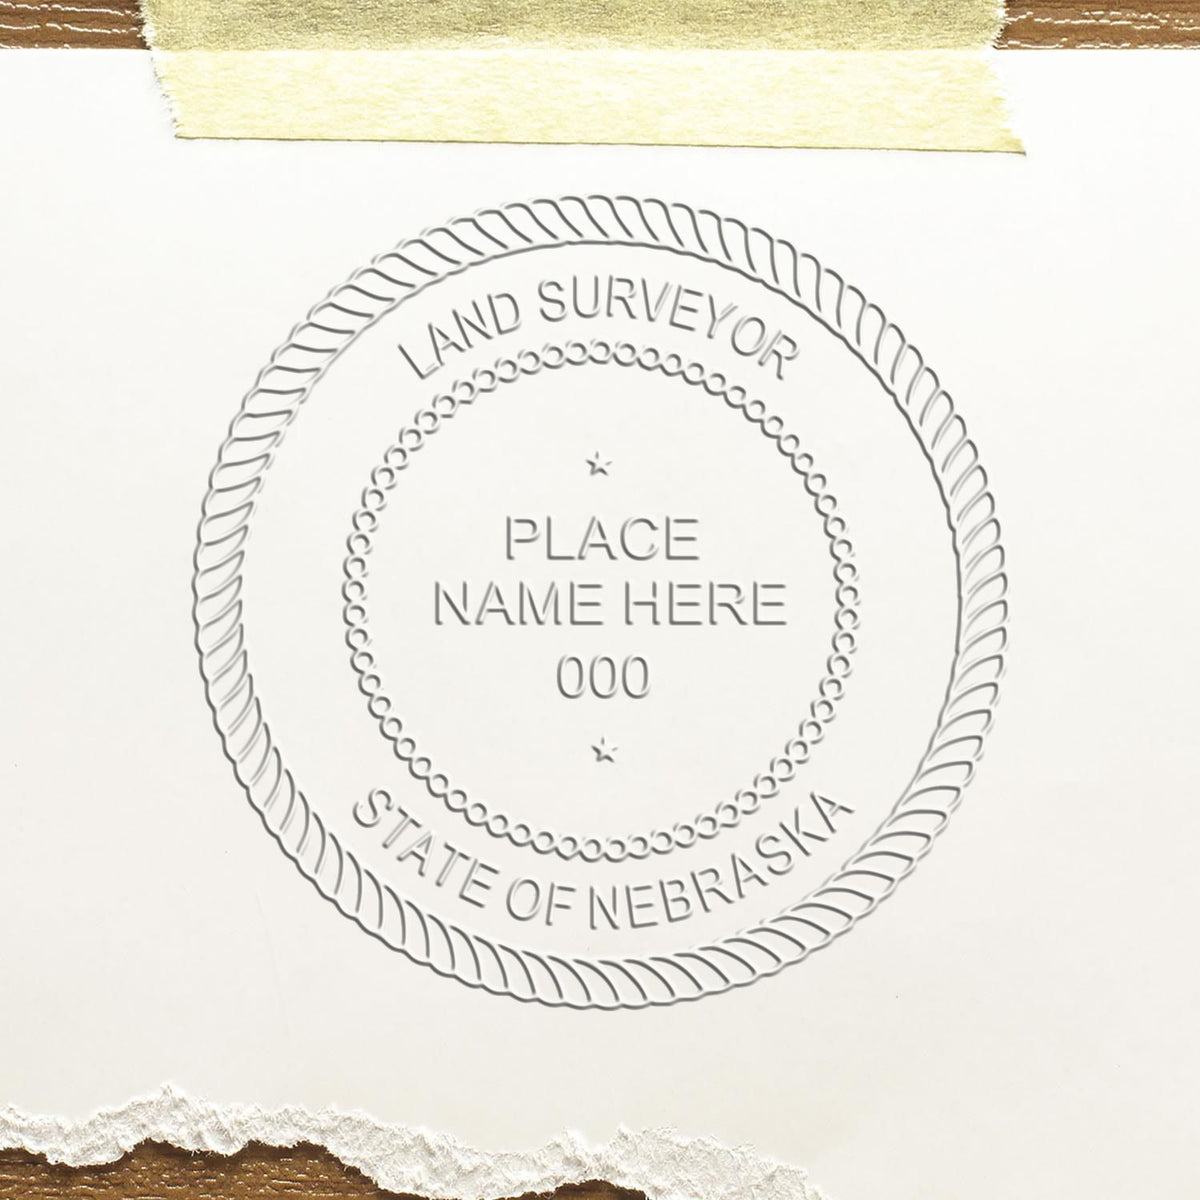 A stamped impression of the Handheld Nebraska Land Surveyor Seal in this stylish lifestyle photo, setting the tone for a unique and personalized product.